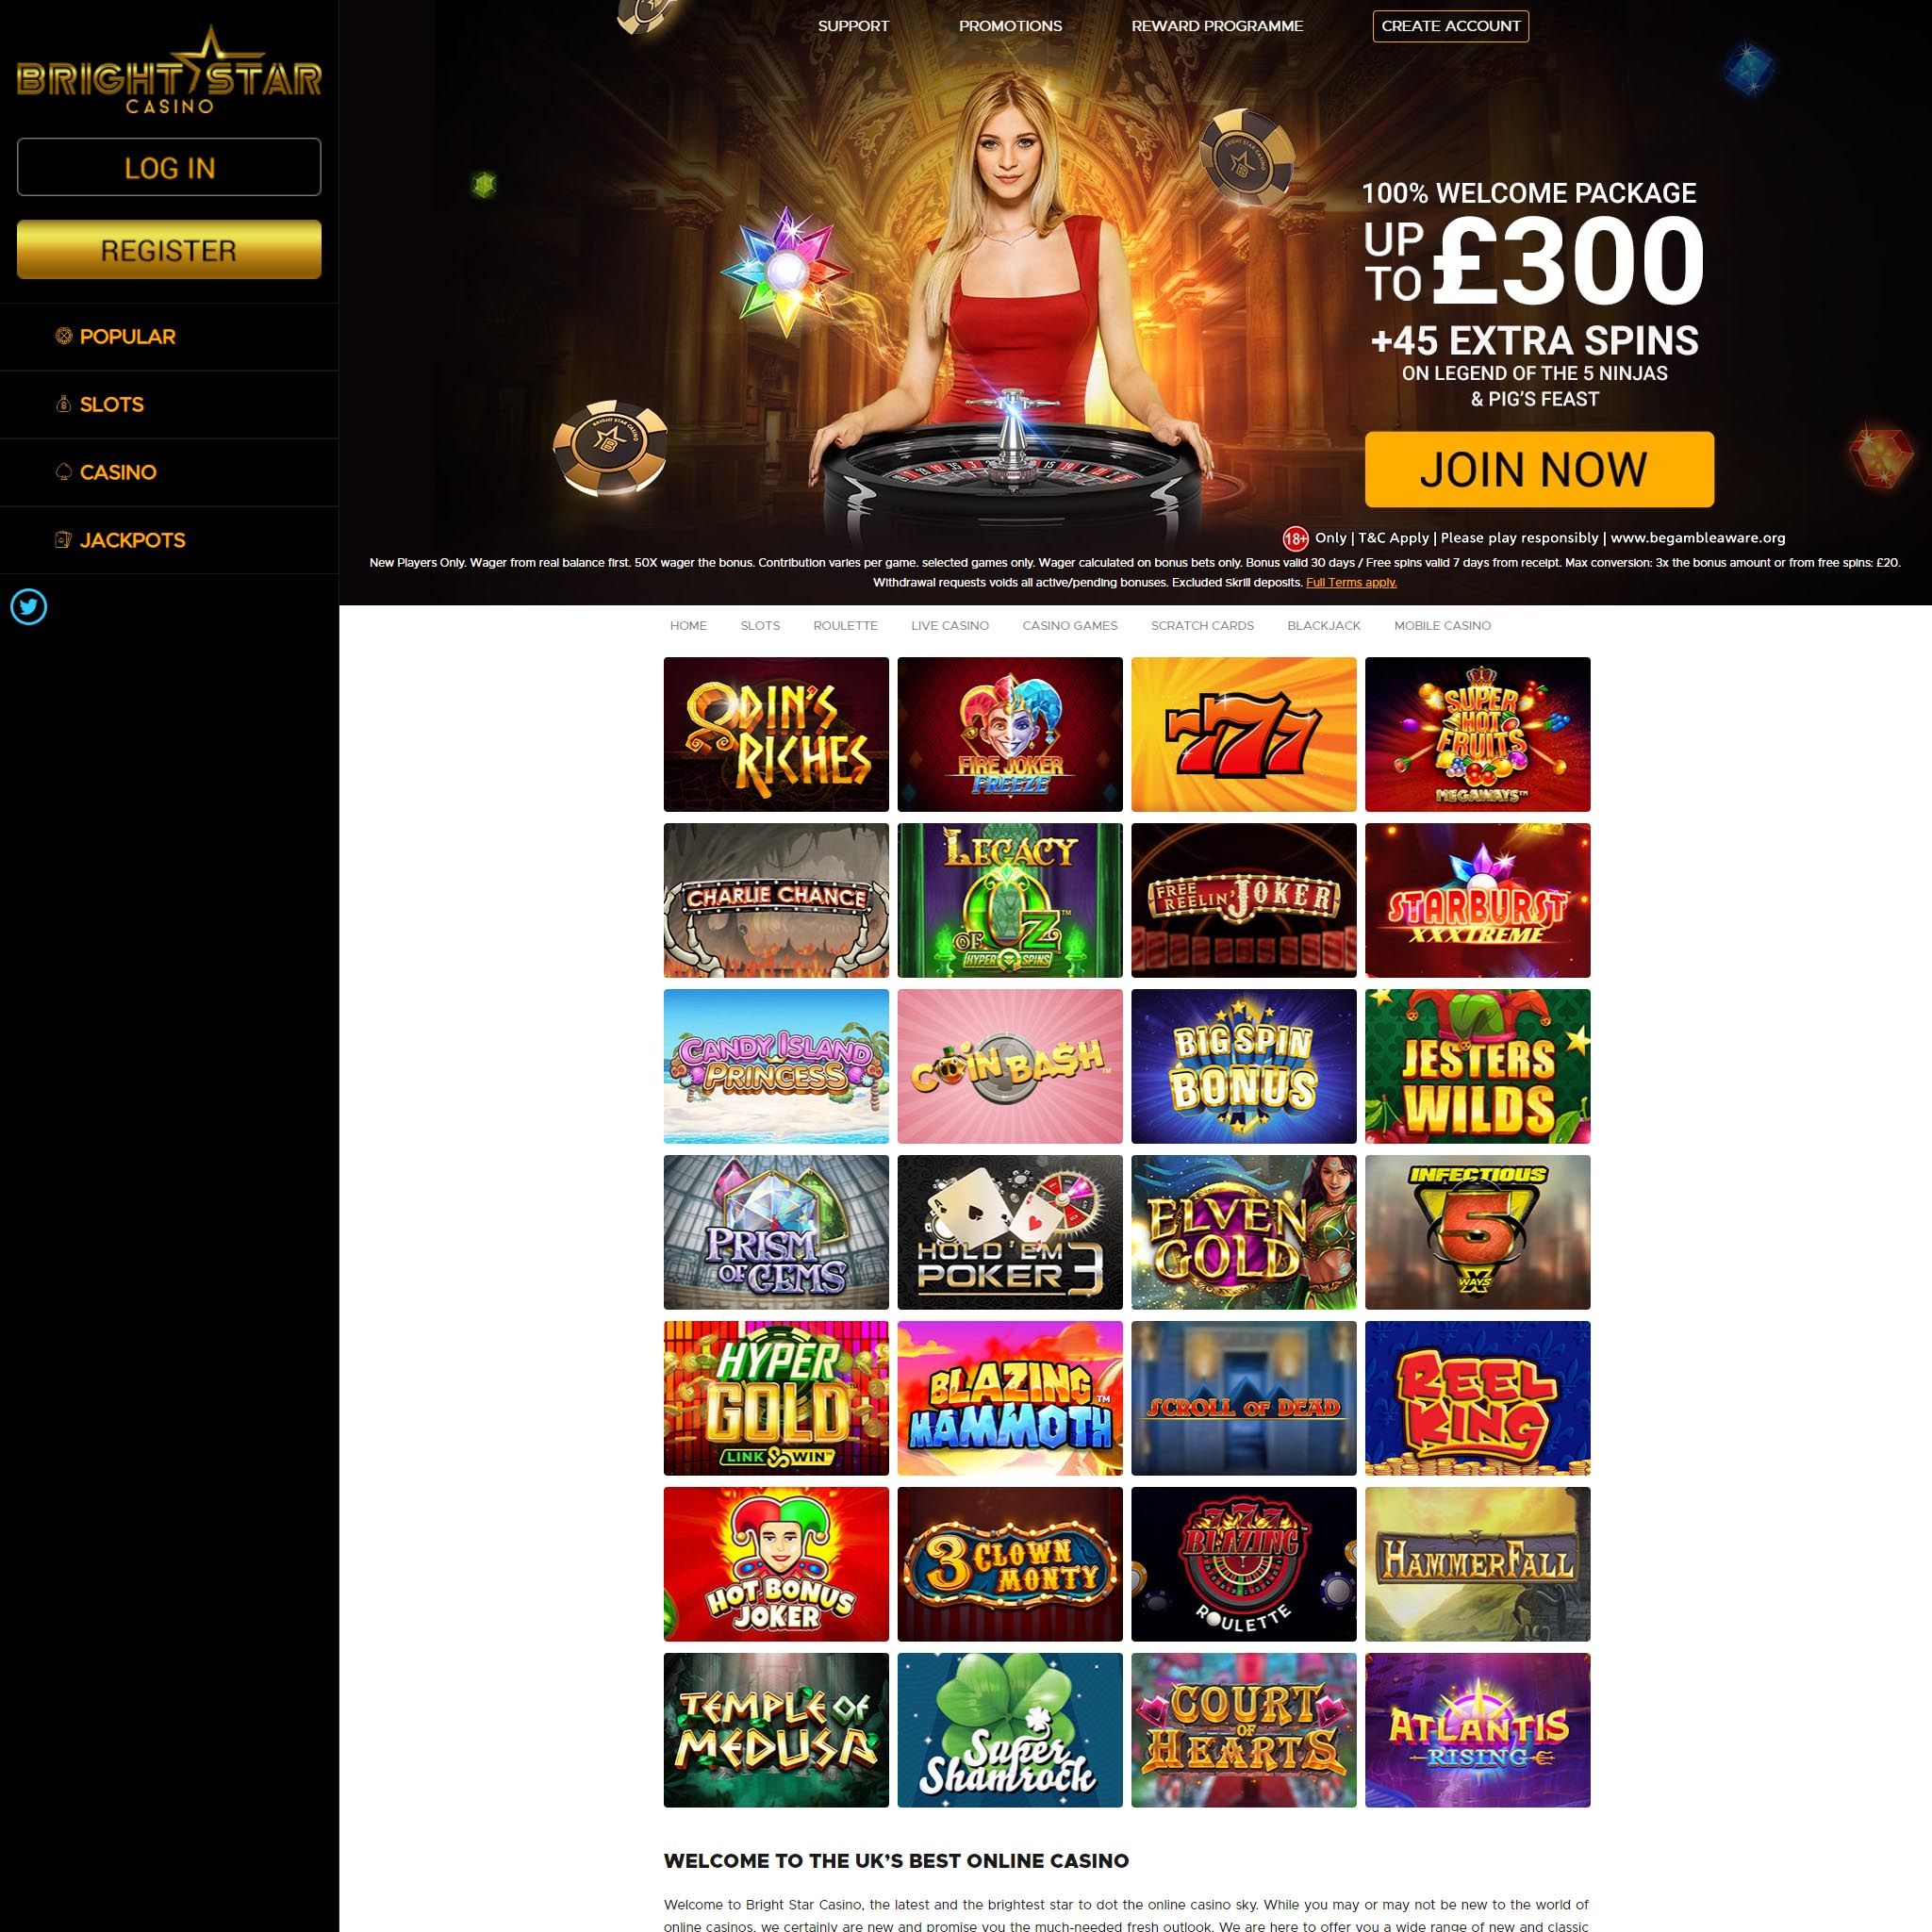 Bright Star Casino UK review by Mr. Gamble